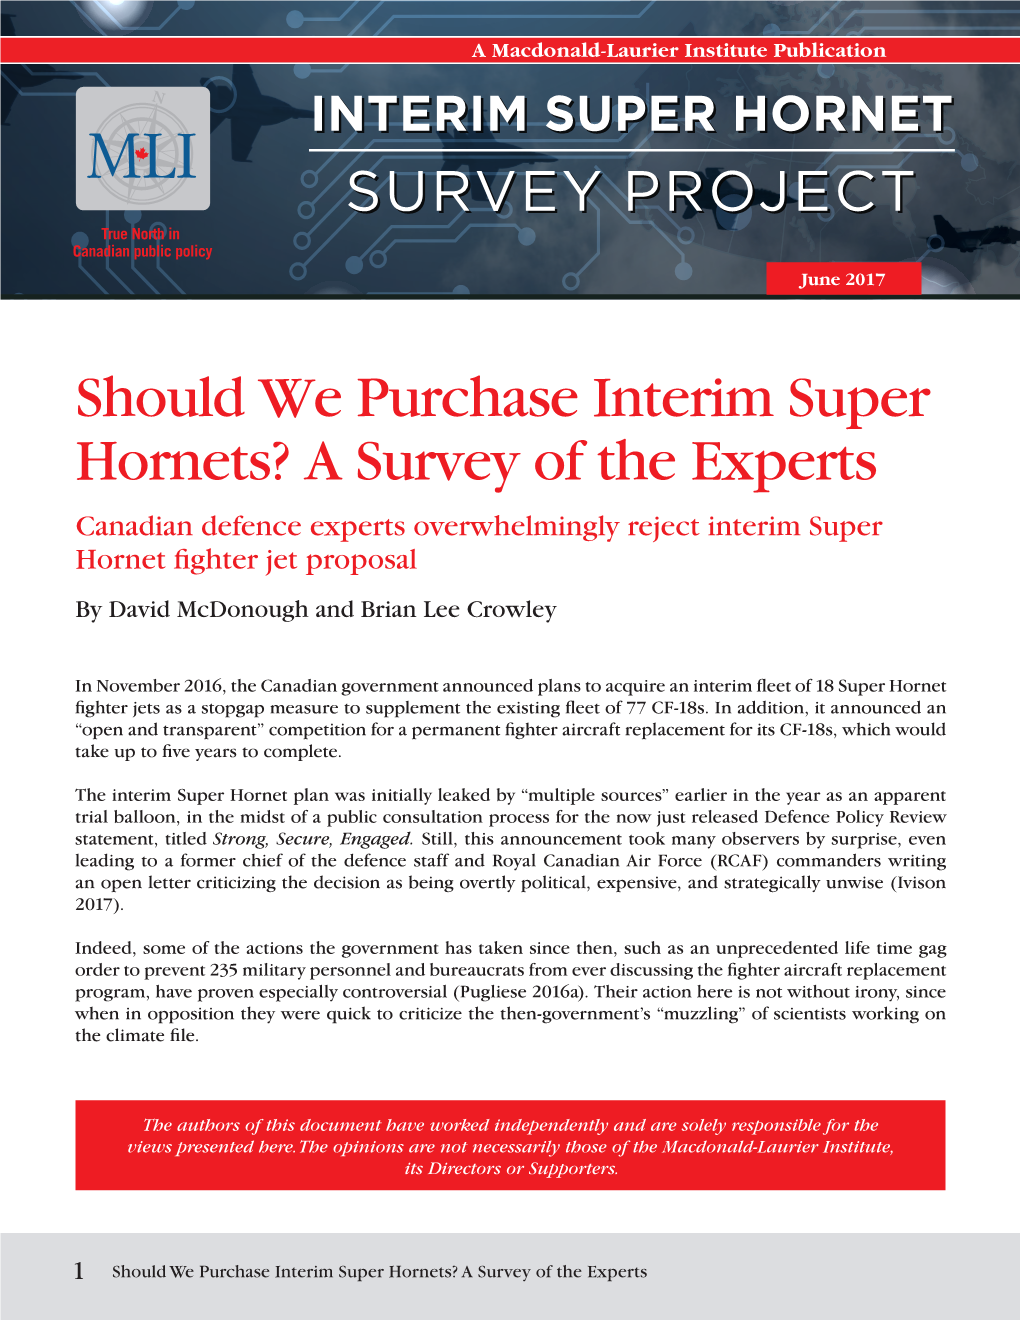 Should We Purchase Interim Super Hornets? a Survey of the Experts